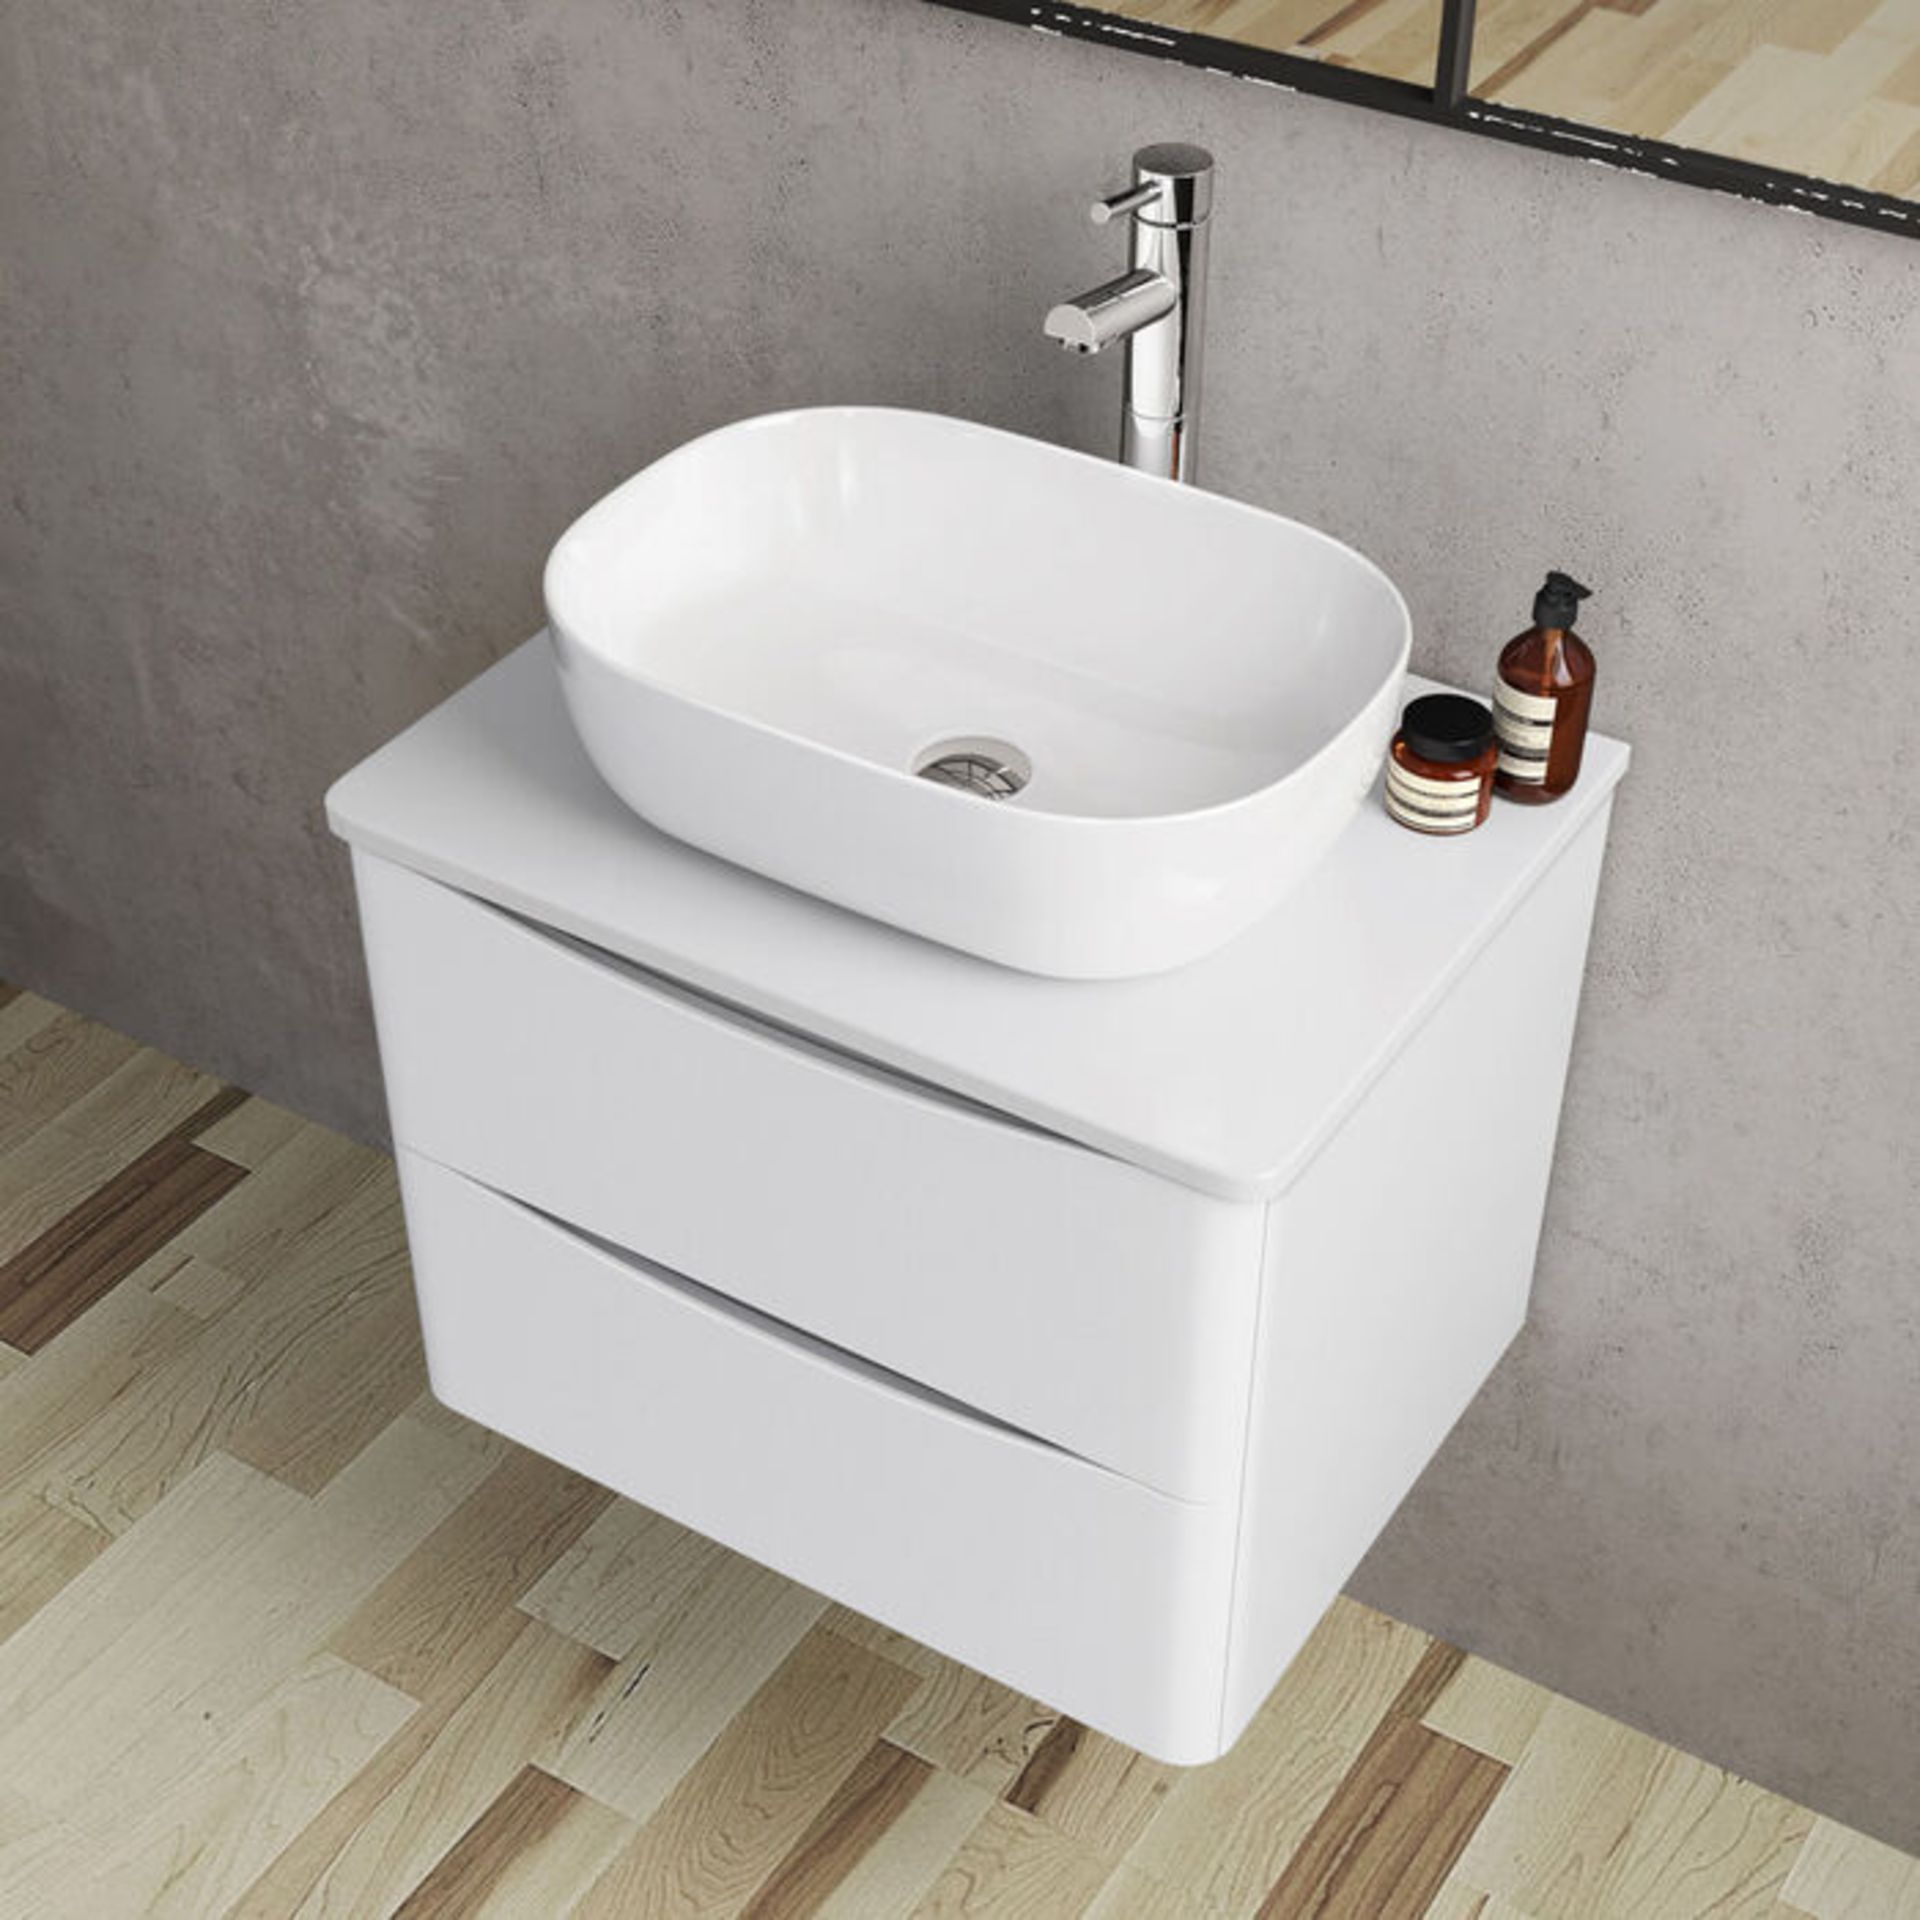 (TT30) 600mm Austin II Gloss White Countertop Unit and Colette Sink - Wall Hung. RRP £499.99. ... - Image 3 of 4